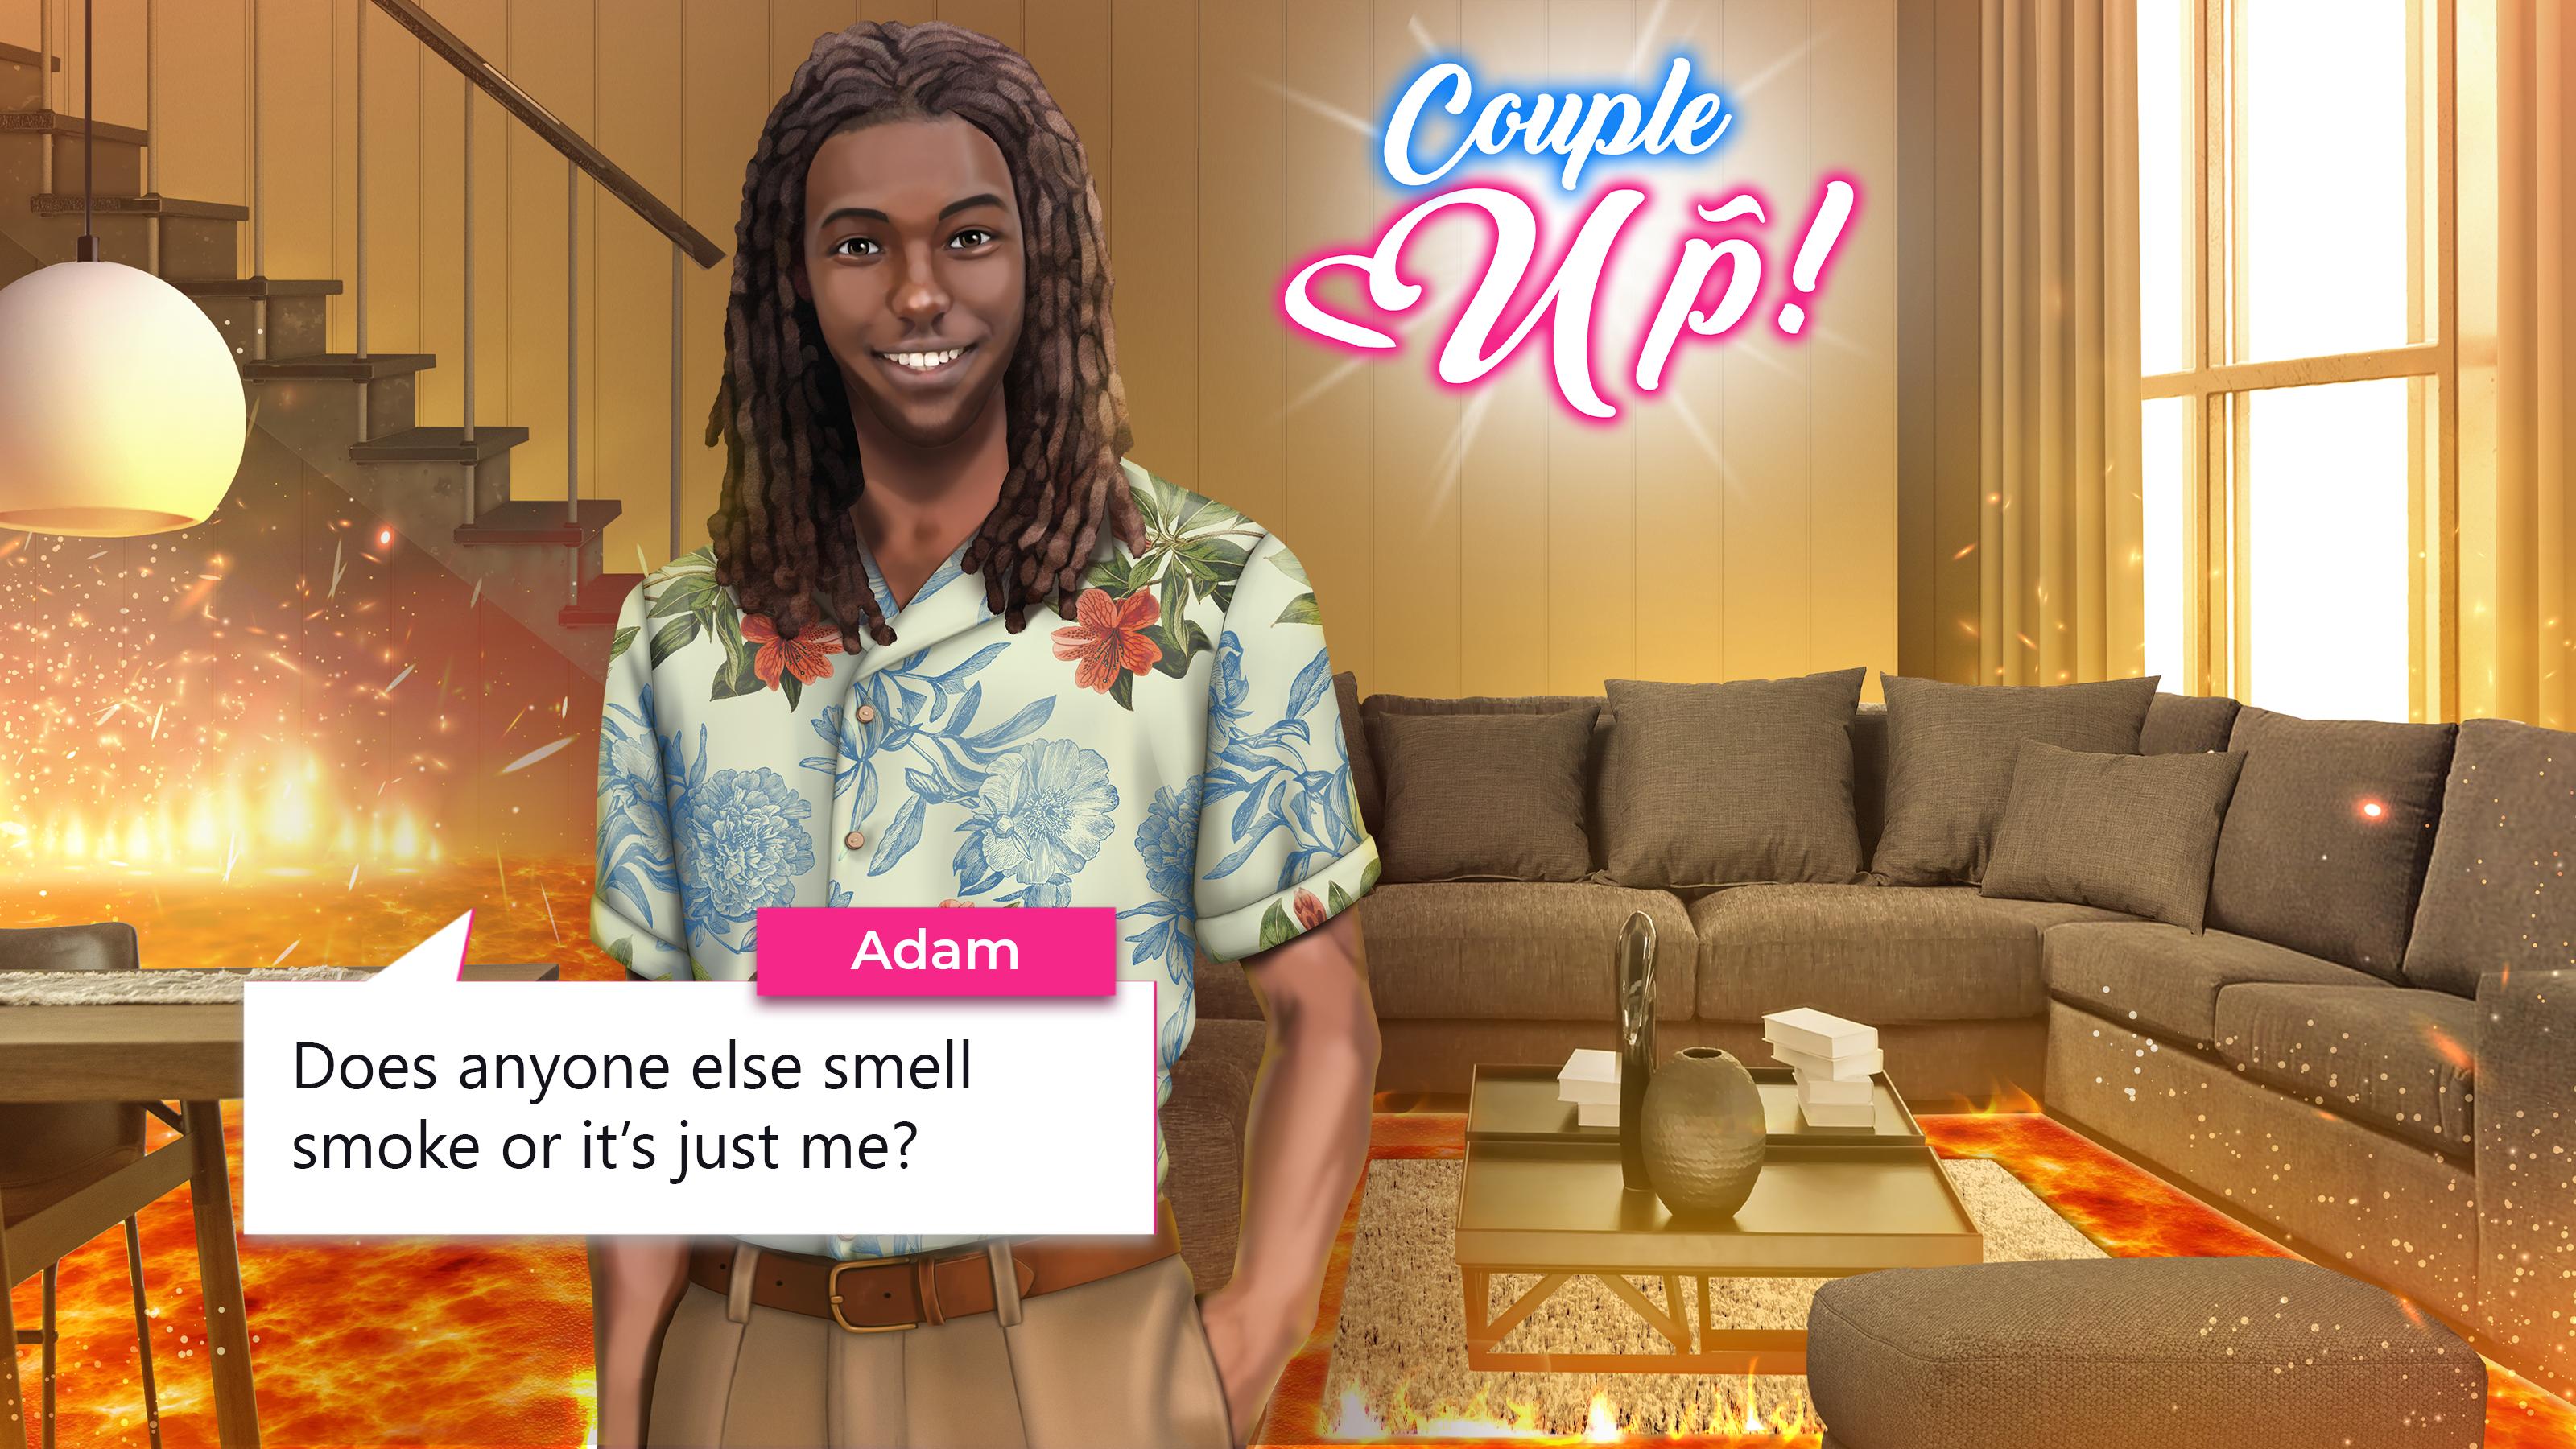 Couple Up! Love Show - Interactive Story 0.7.5 Screenshot 24